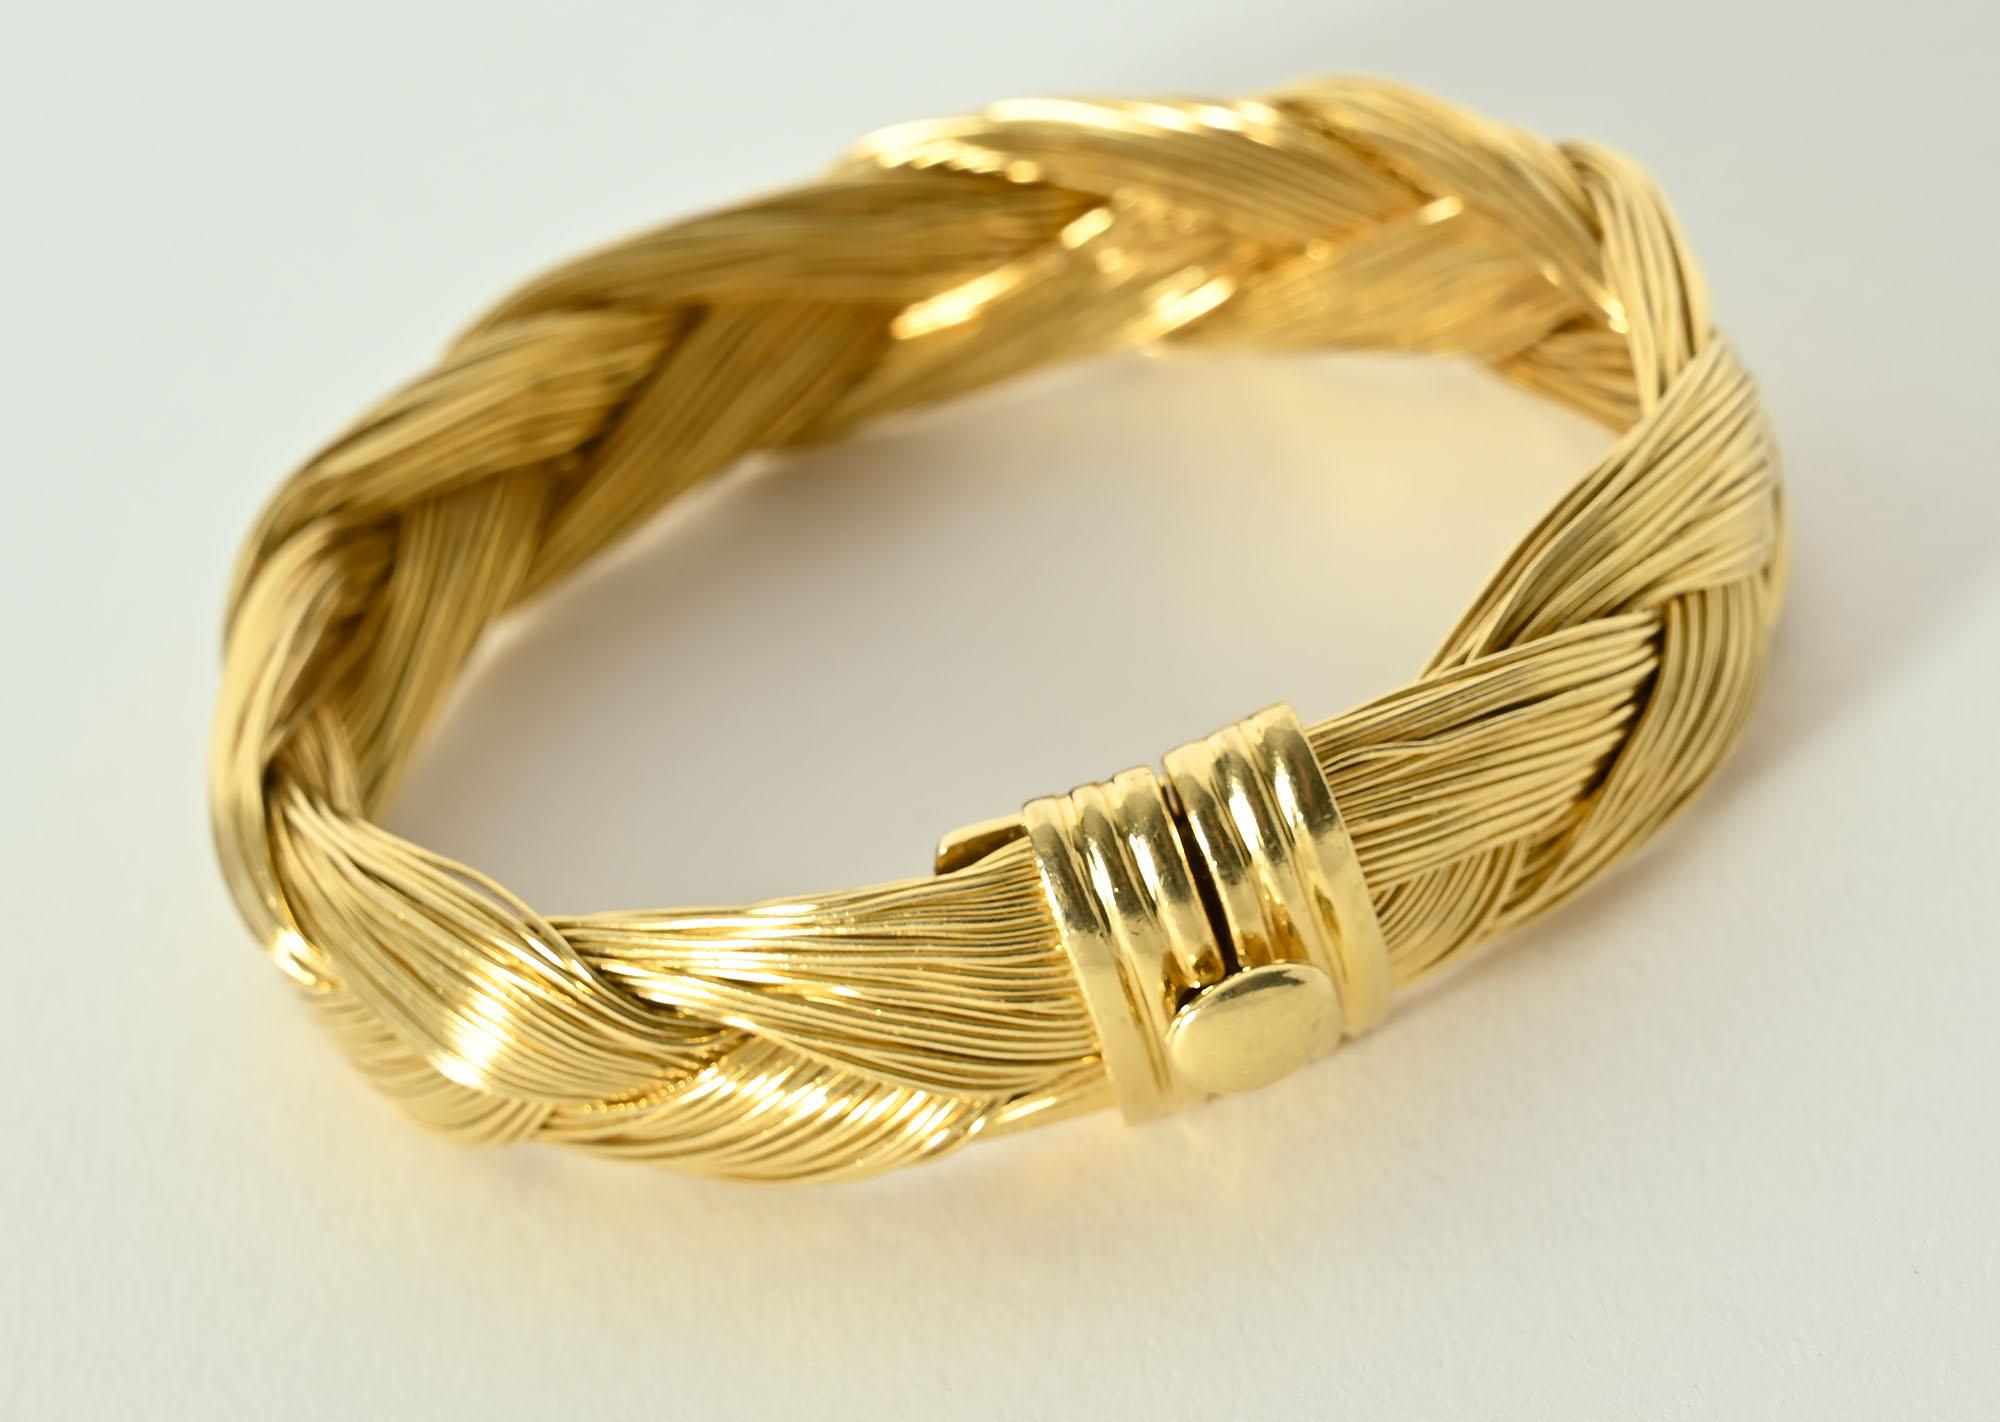 Henry Dunay Gold Braided Bracelet In Excellent Condition For Sale In Darnestown, MD